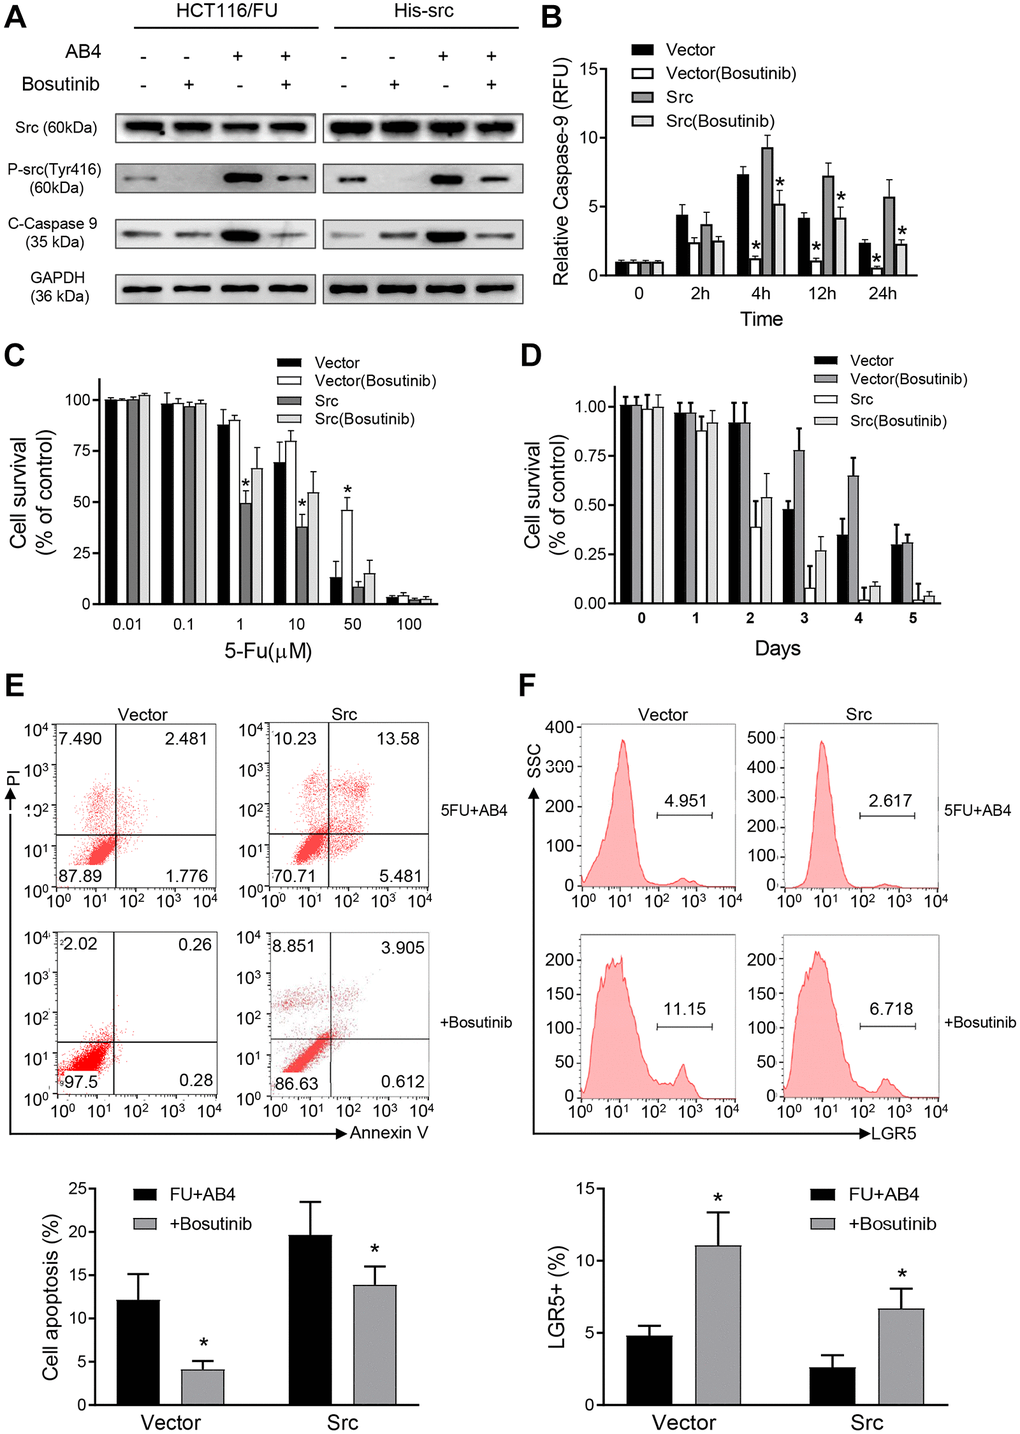 Src promotes synergistic effects of AB4 with 5-FU treatment. (A) HCT116/FU cells were transfected with His-Src or vector plasmids, followed by 25 μM AB4 and 20 μM 5-FU treatment. Bosutinib was used for Src signaling inhibition as indicated. Phosphorylated Src and cleaved caspase-9 protein were measured with Western blot assays. GAPDH was used as loading control. (B) Infected HCT116/FU cells were treated as indicated. Caspase-9 activity was evaluated in the indicated time. (C) MTT assays were performed with the infected HCT116/FU cells with gradient of 5-FU. HCT116/FU-vector cells were also treated with Bosutinib for Src signaling inhibition. (D) Infected HCT116/FU cells were treated with 25 μM AB4, 20 μM 5-FU and Bosutinib for 5 days. Cell viability was examined by MTT assays. (E) Infected HCT116/FU cells were treated with AB4,5-FU and Bosutinib. Cell apoptosis was analyzed by flow cytometry. (F) The percentage of LGR5+ of HCT116/FU-Src and control cells were analyzed by flowcytometry, which were also treated with 25 μM AB4 for 48 h. The results represent at least three independent experiments. Data represent as the means ± SEM. *P 